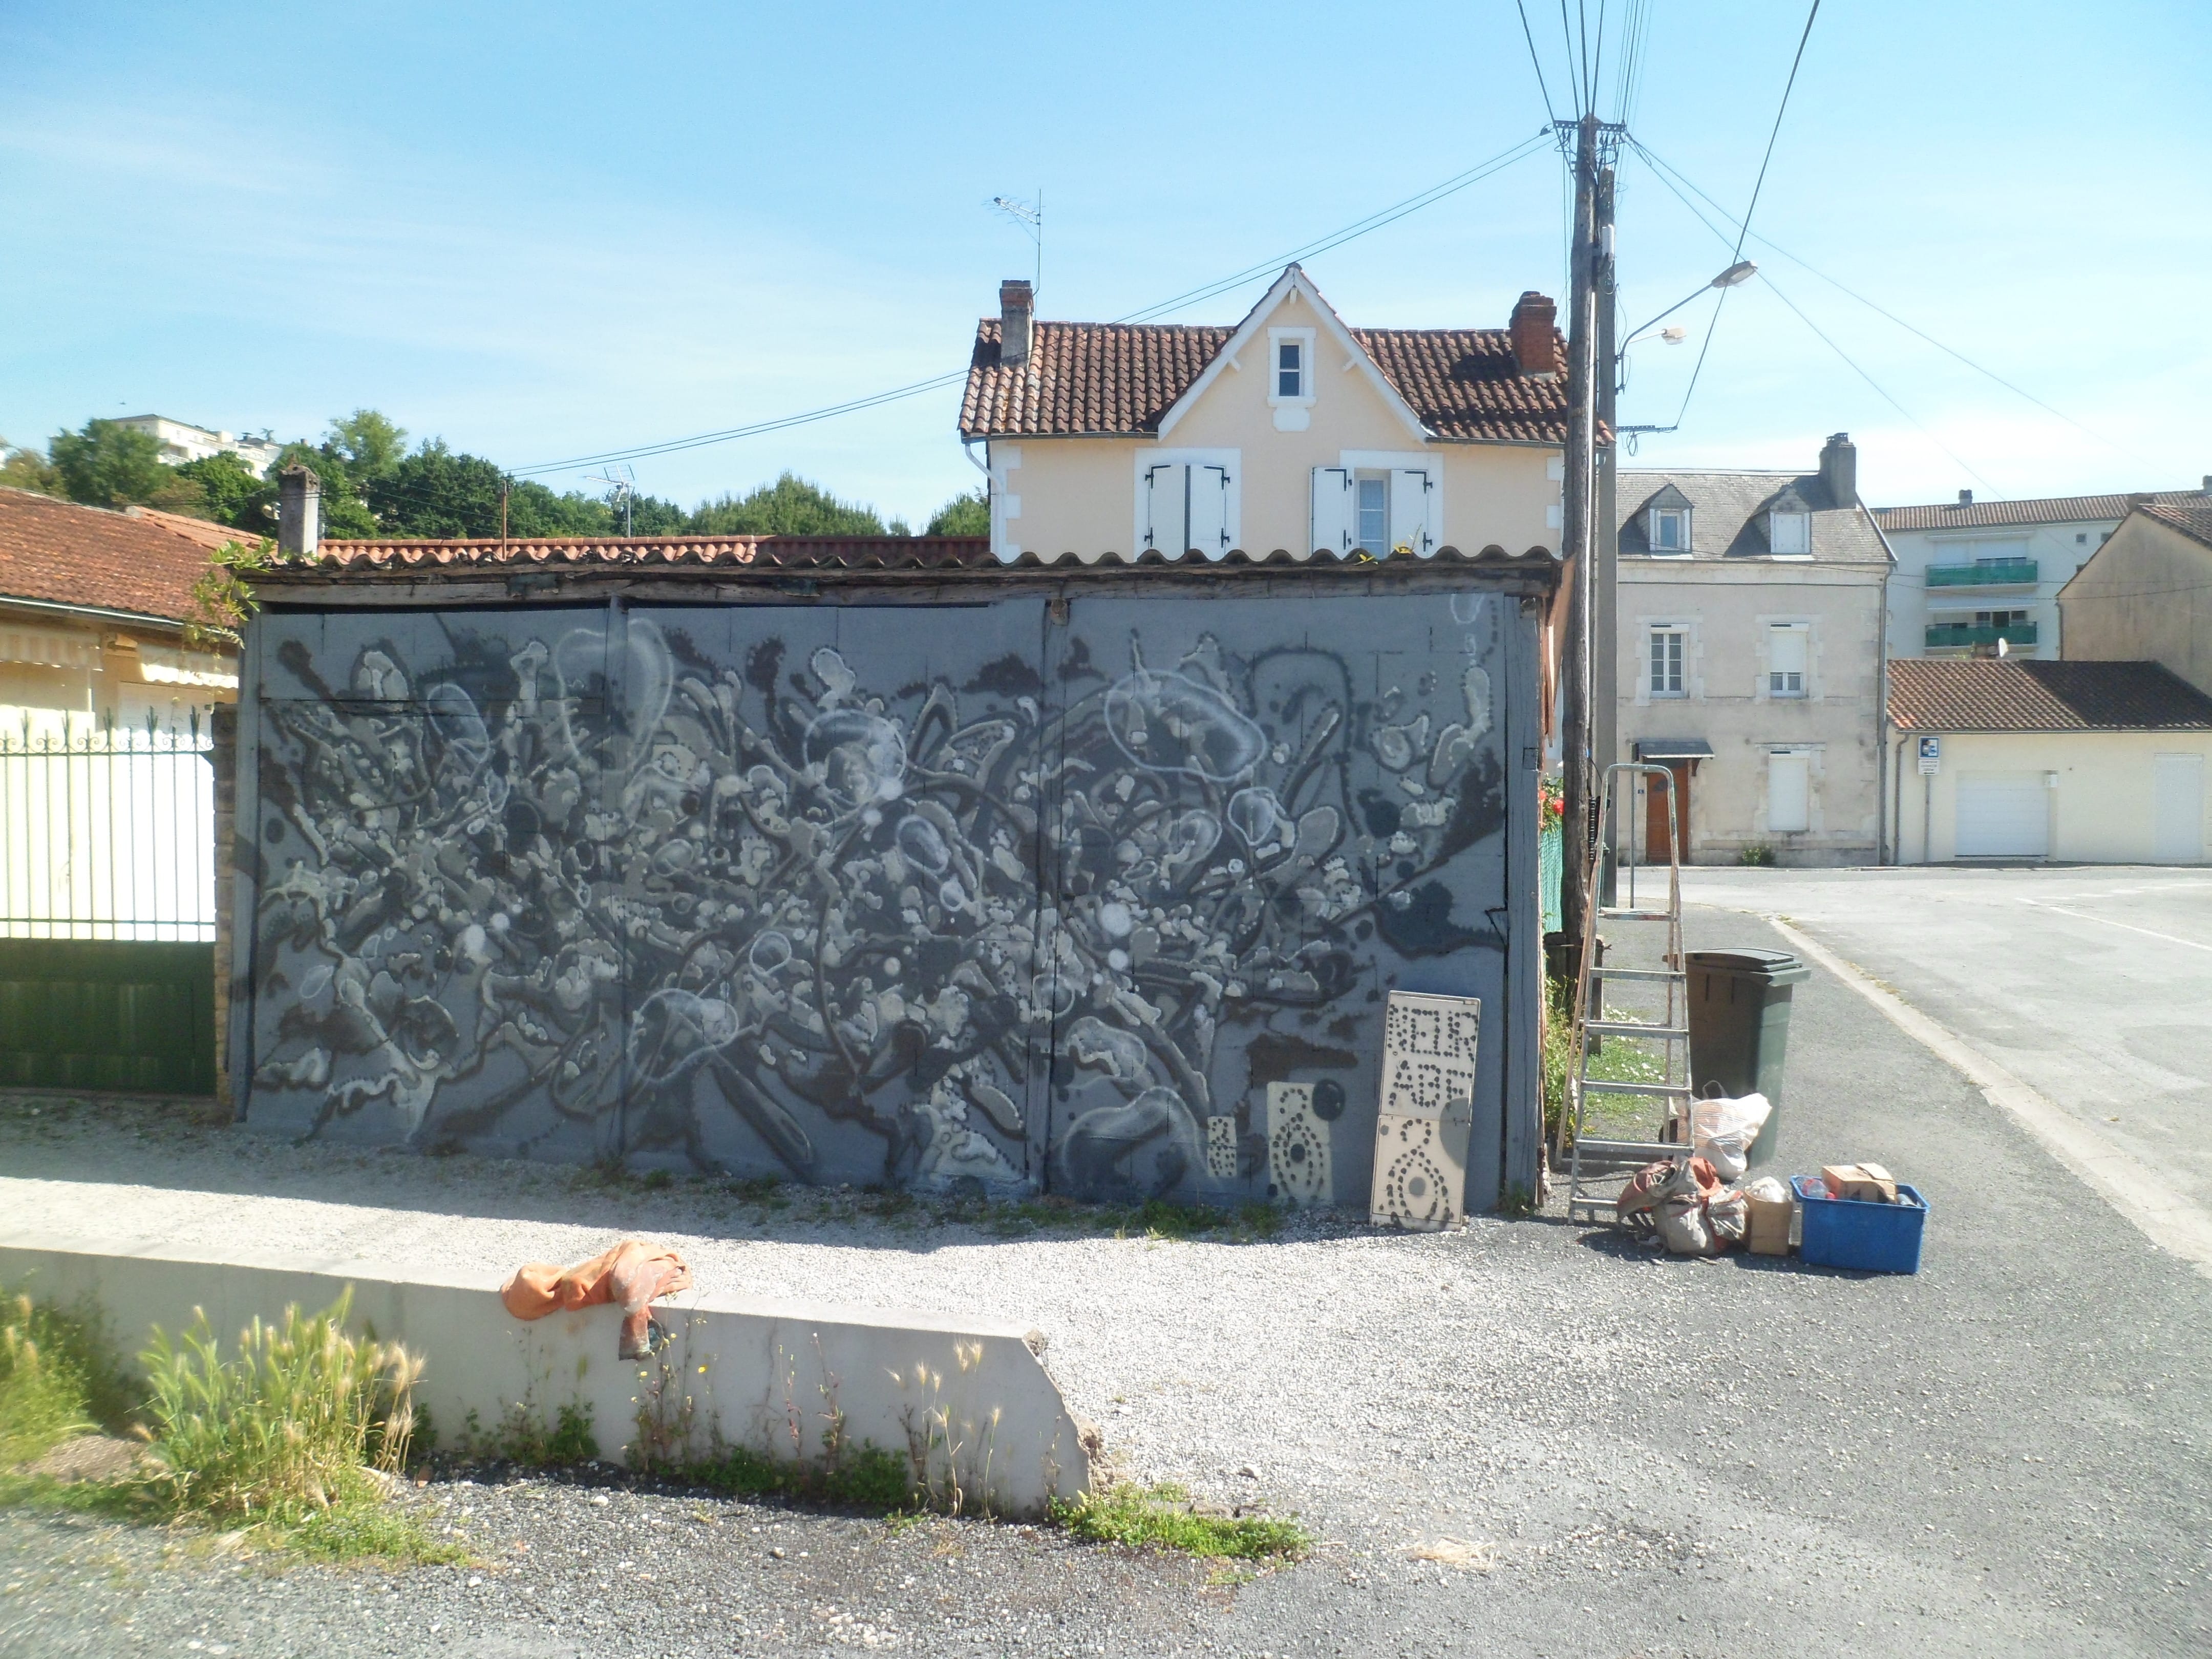 Graffiti 5661 #neurabf captured by Neur Abf in Périgueux France